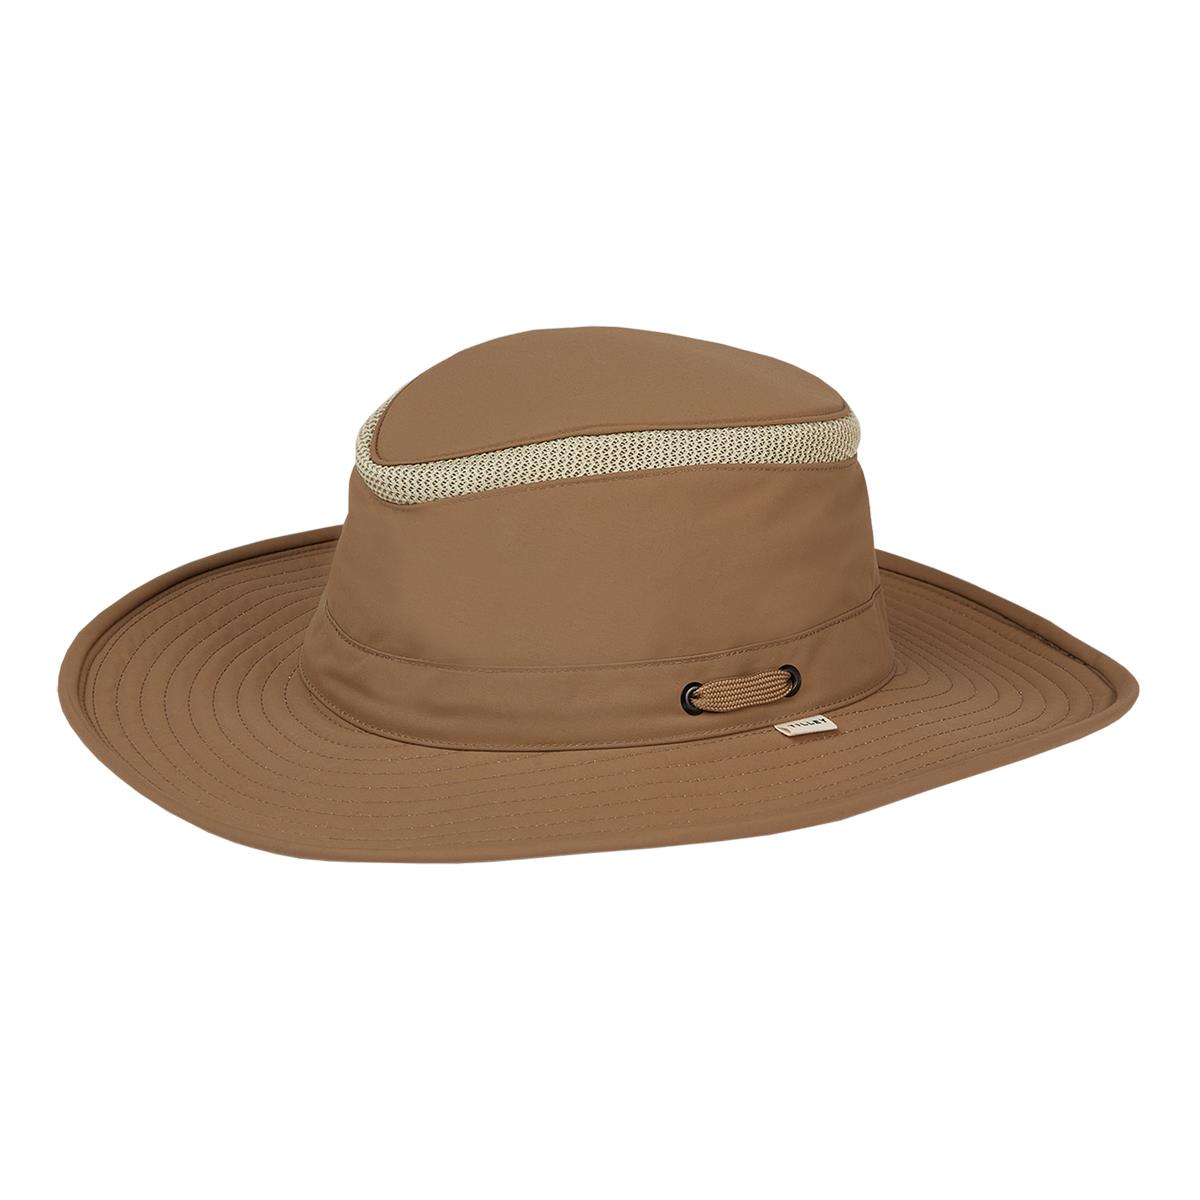 What makes the Tilley Airflo Hat a popular choice?